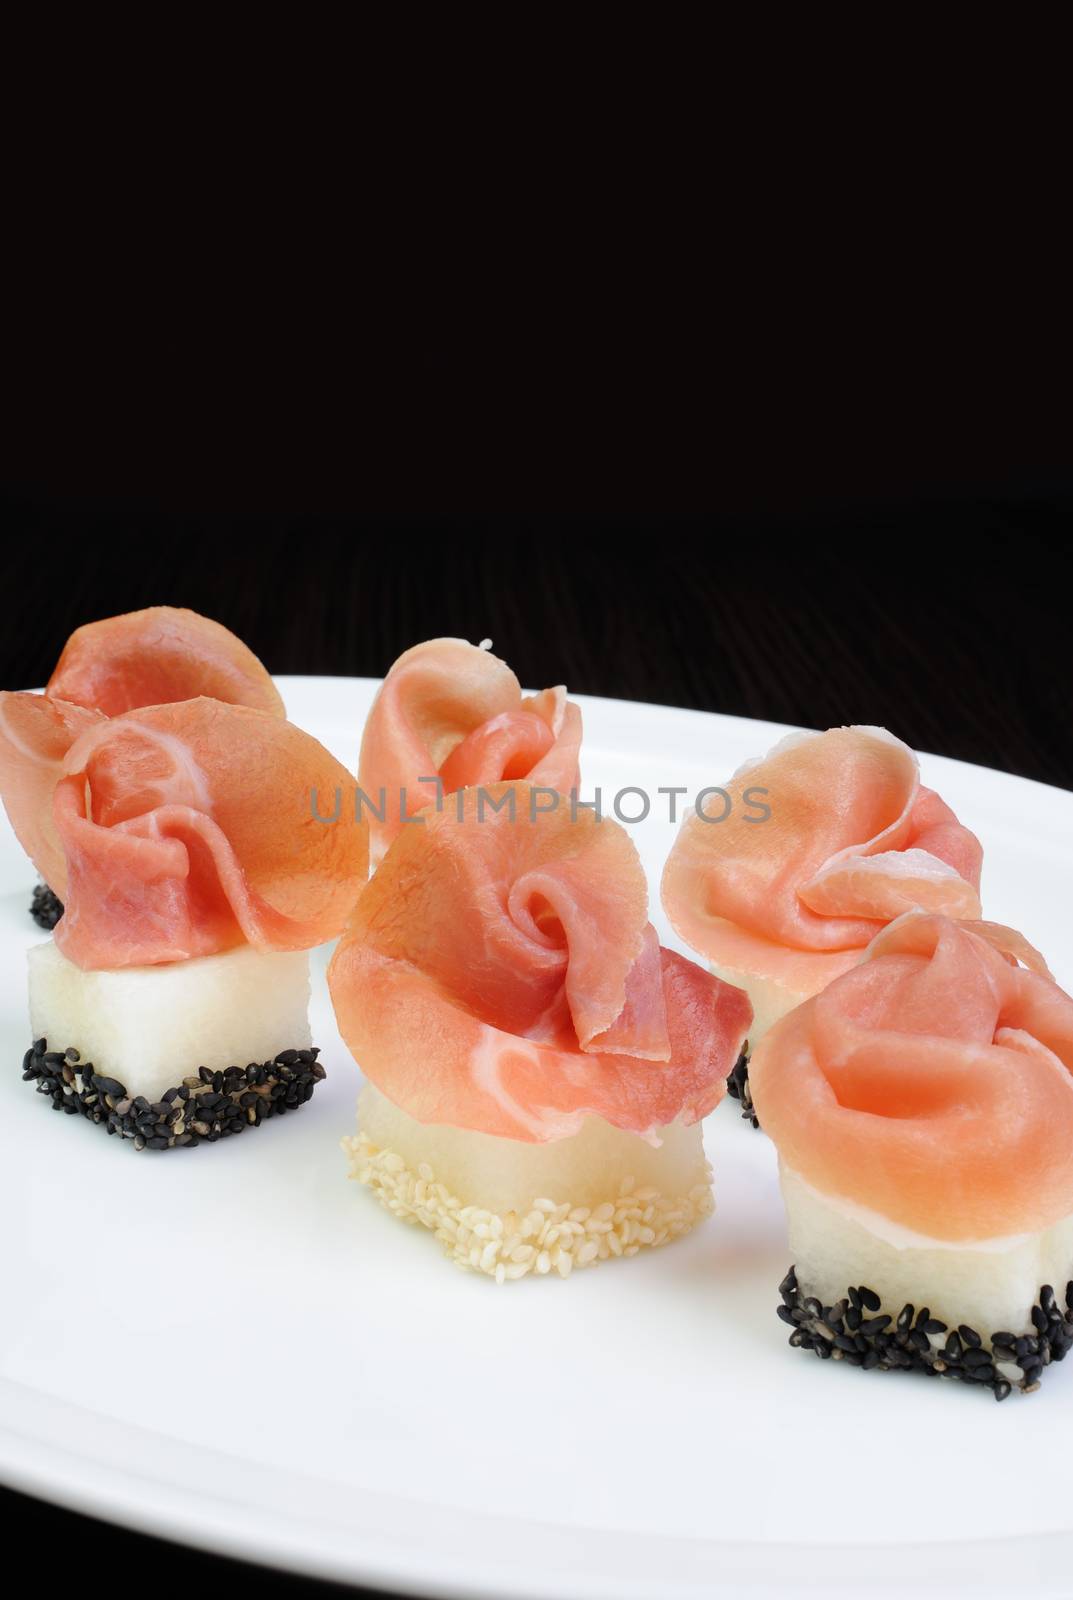 Appetizer of melon cubes in sesame with a slice of gammon